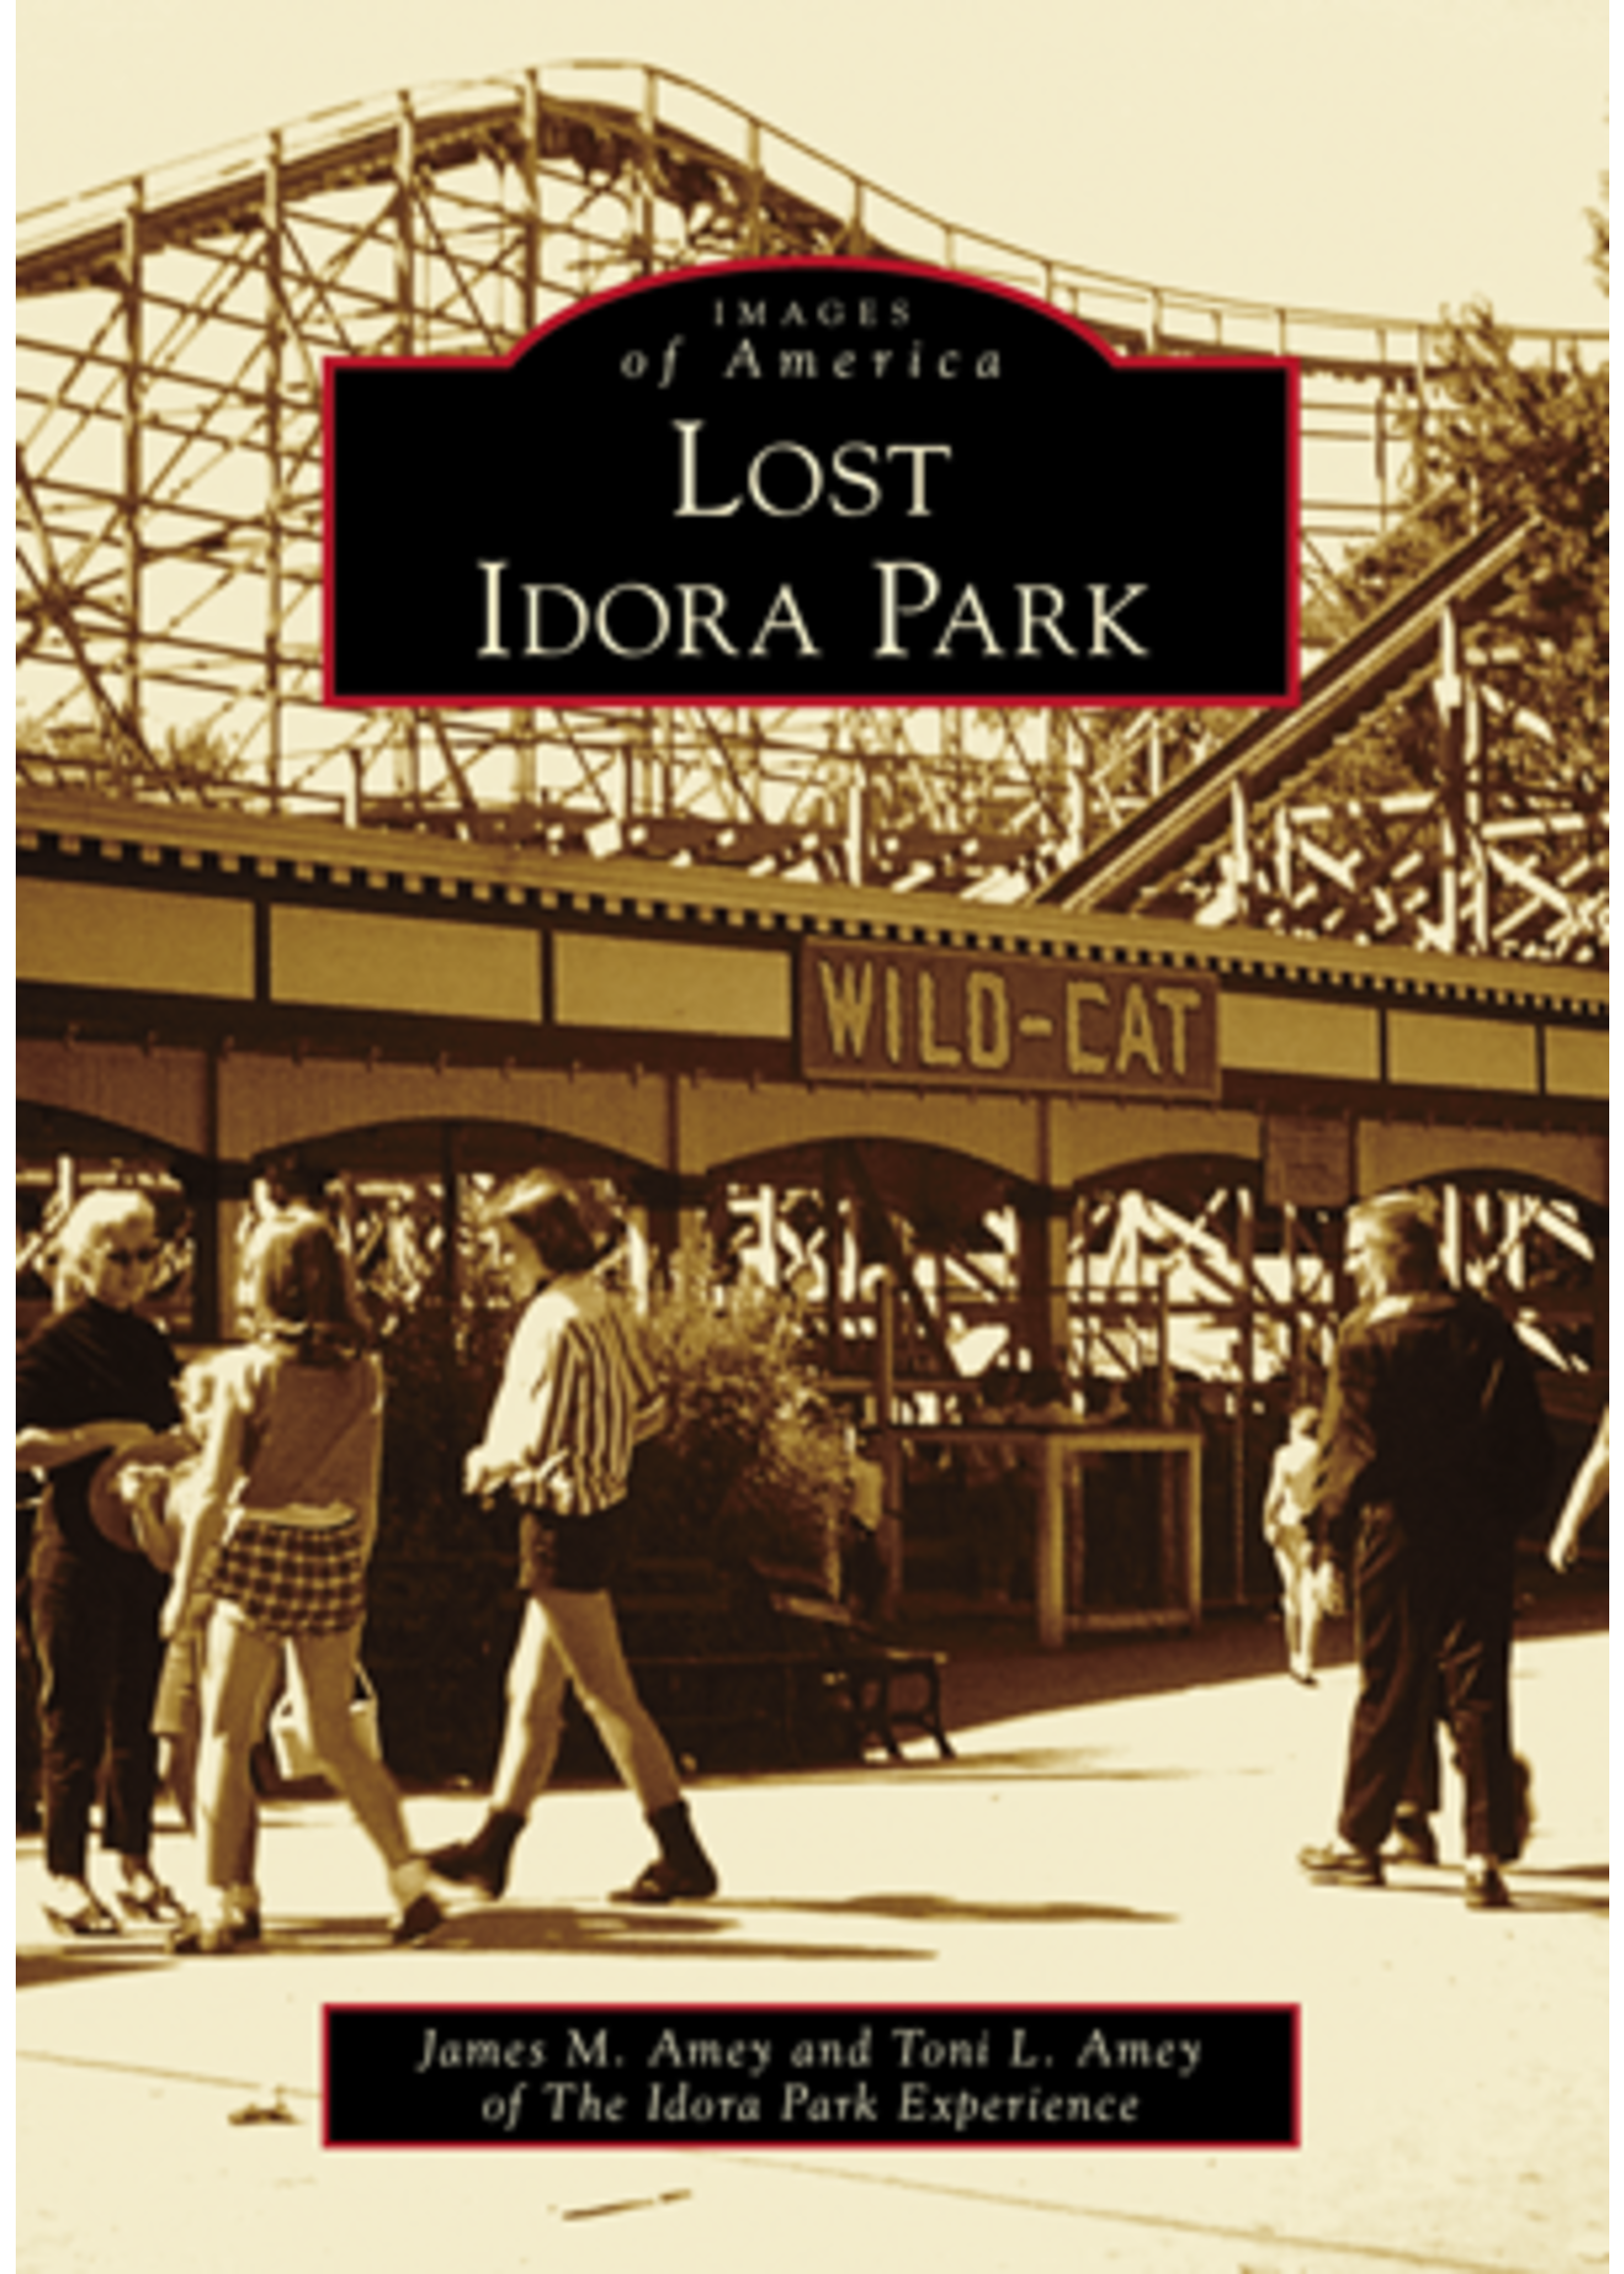 Images of America - Lost Idora Park